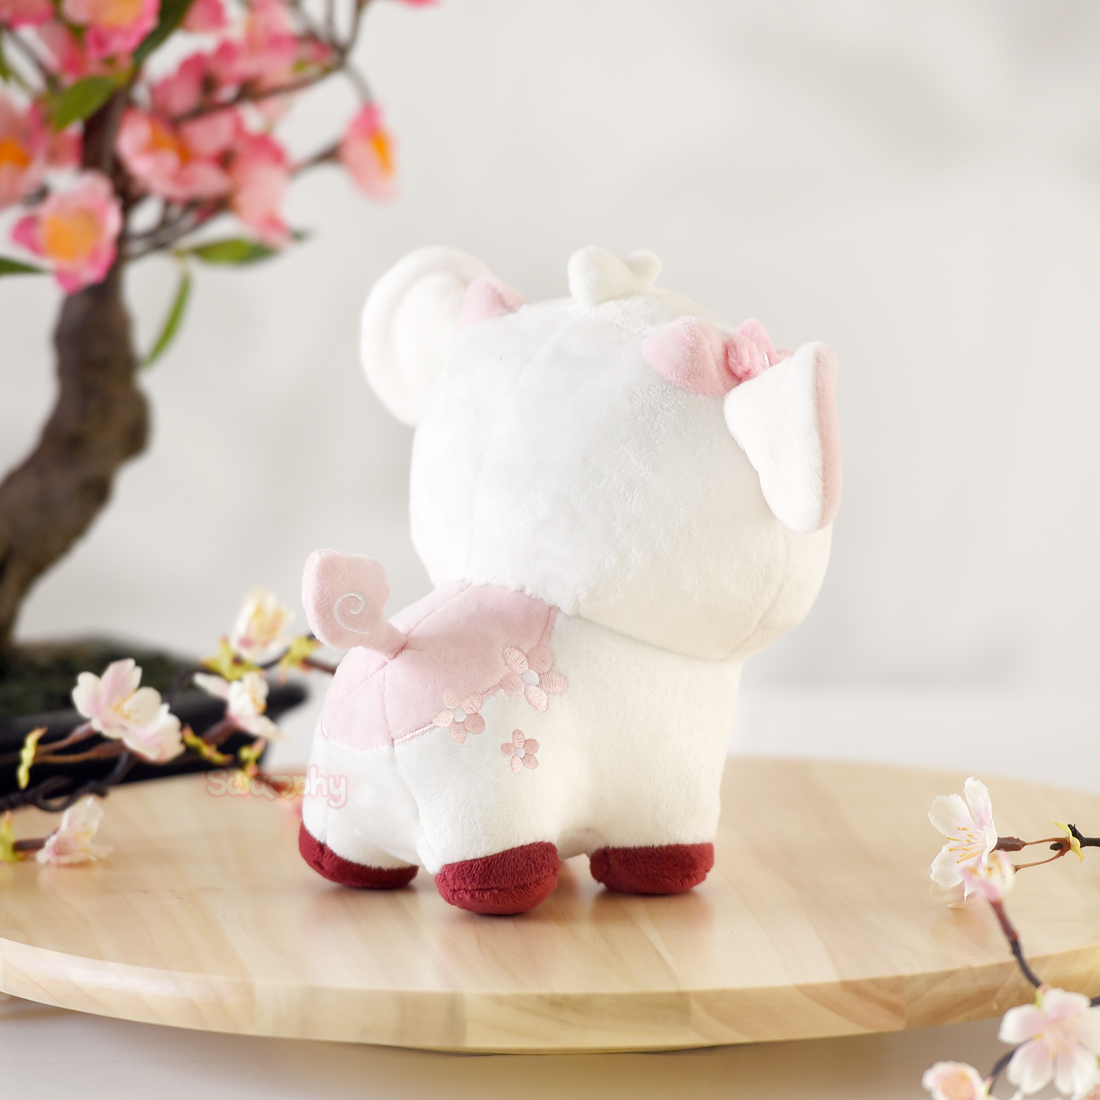 Cherry the Cherry Blossom Cow Plushie